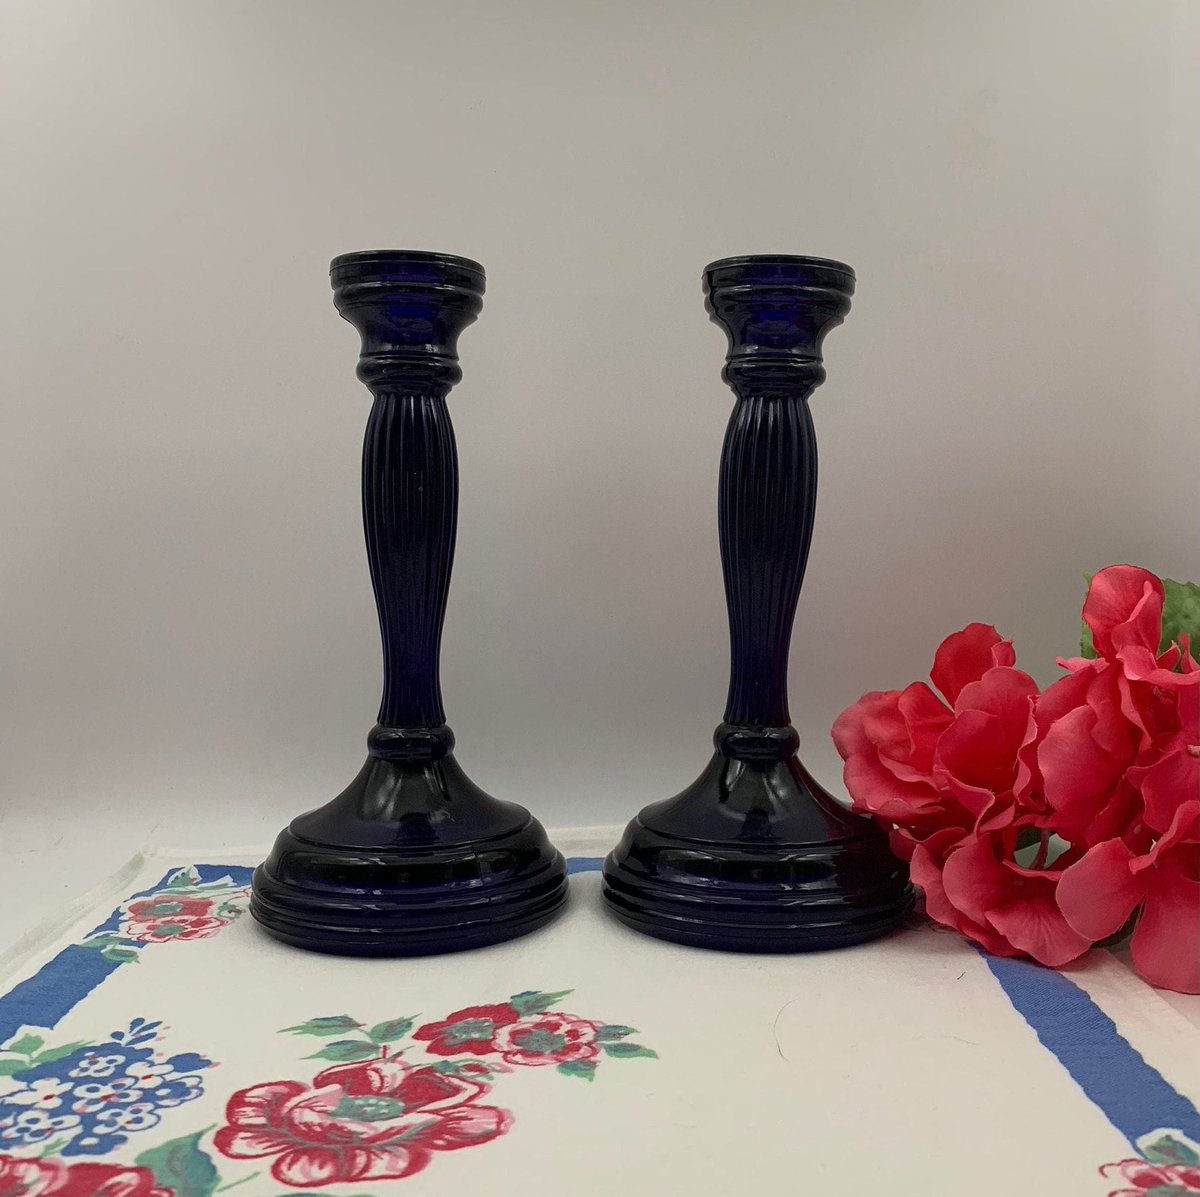 Excited to share this item from my #etsy shop: Vintage Cobalt Blue Glass Candlesticks, Heavy Blue Glass Taper Candle Holders Table Decor, Cottage Farm House Decor, Gift for Her #mothersday #glasscandleholder #cobaltblue #candlestickholder #cottagechic etsy.me/41fhXhu